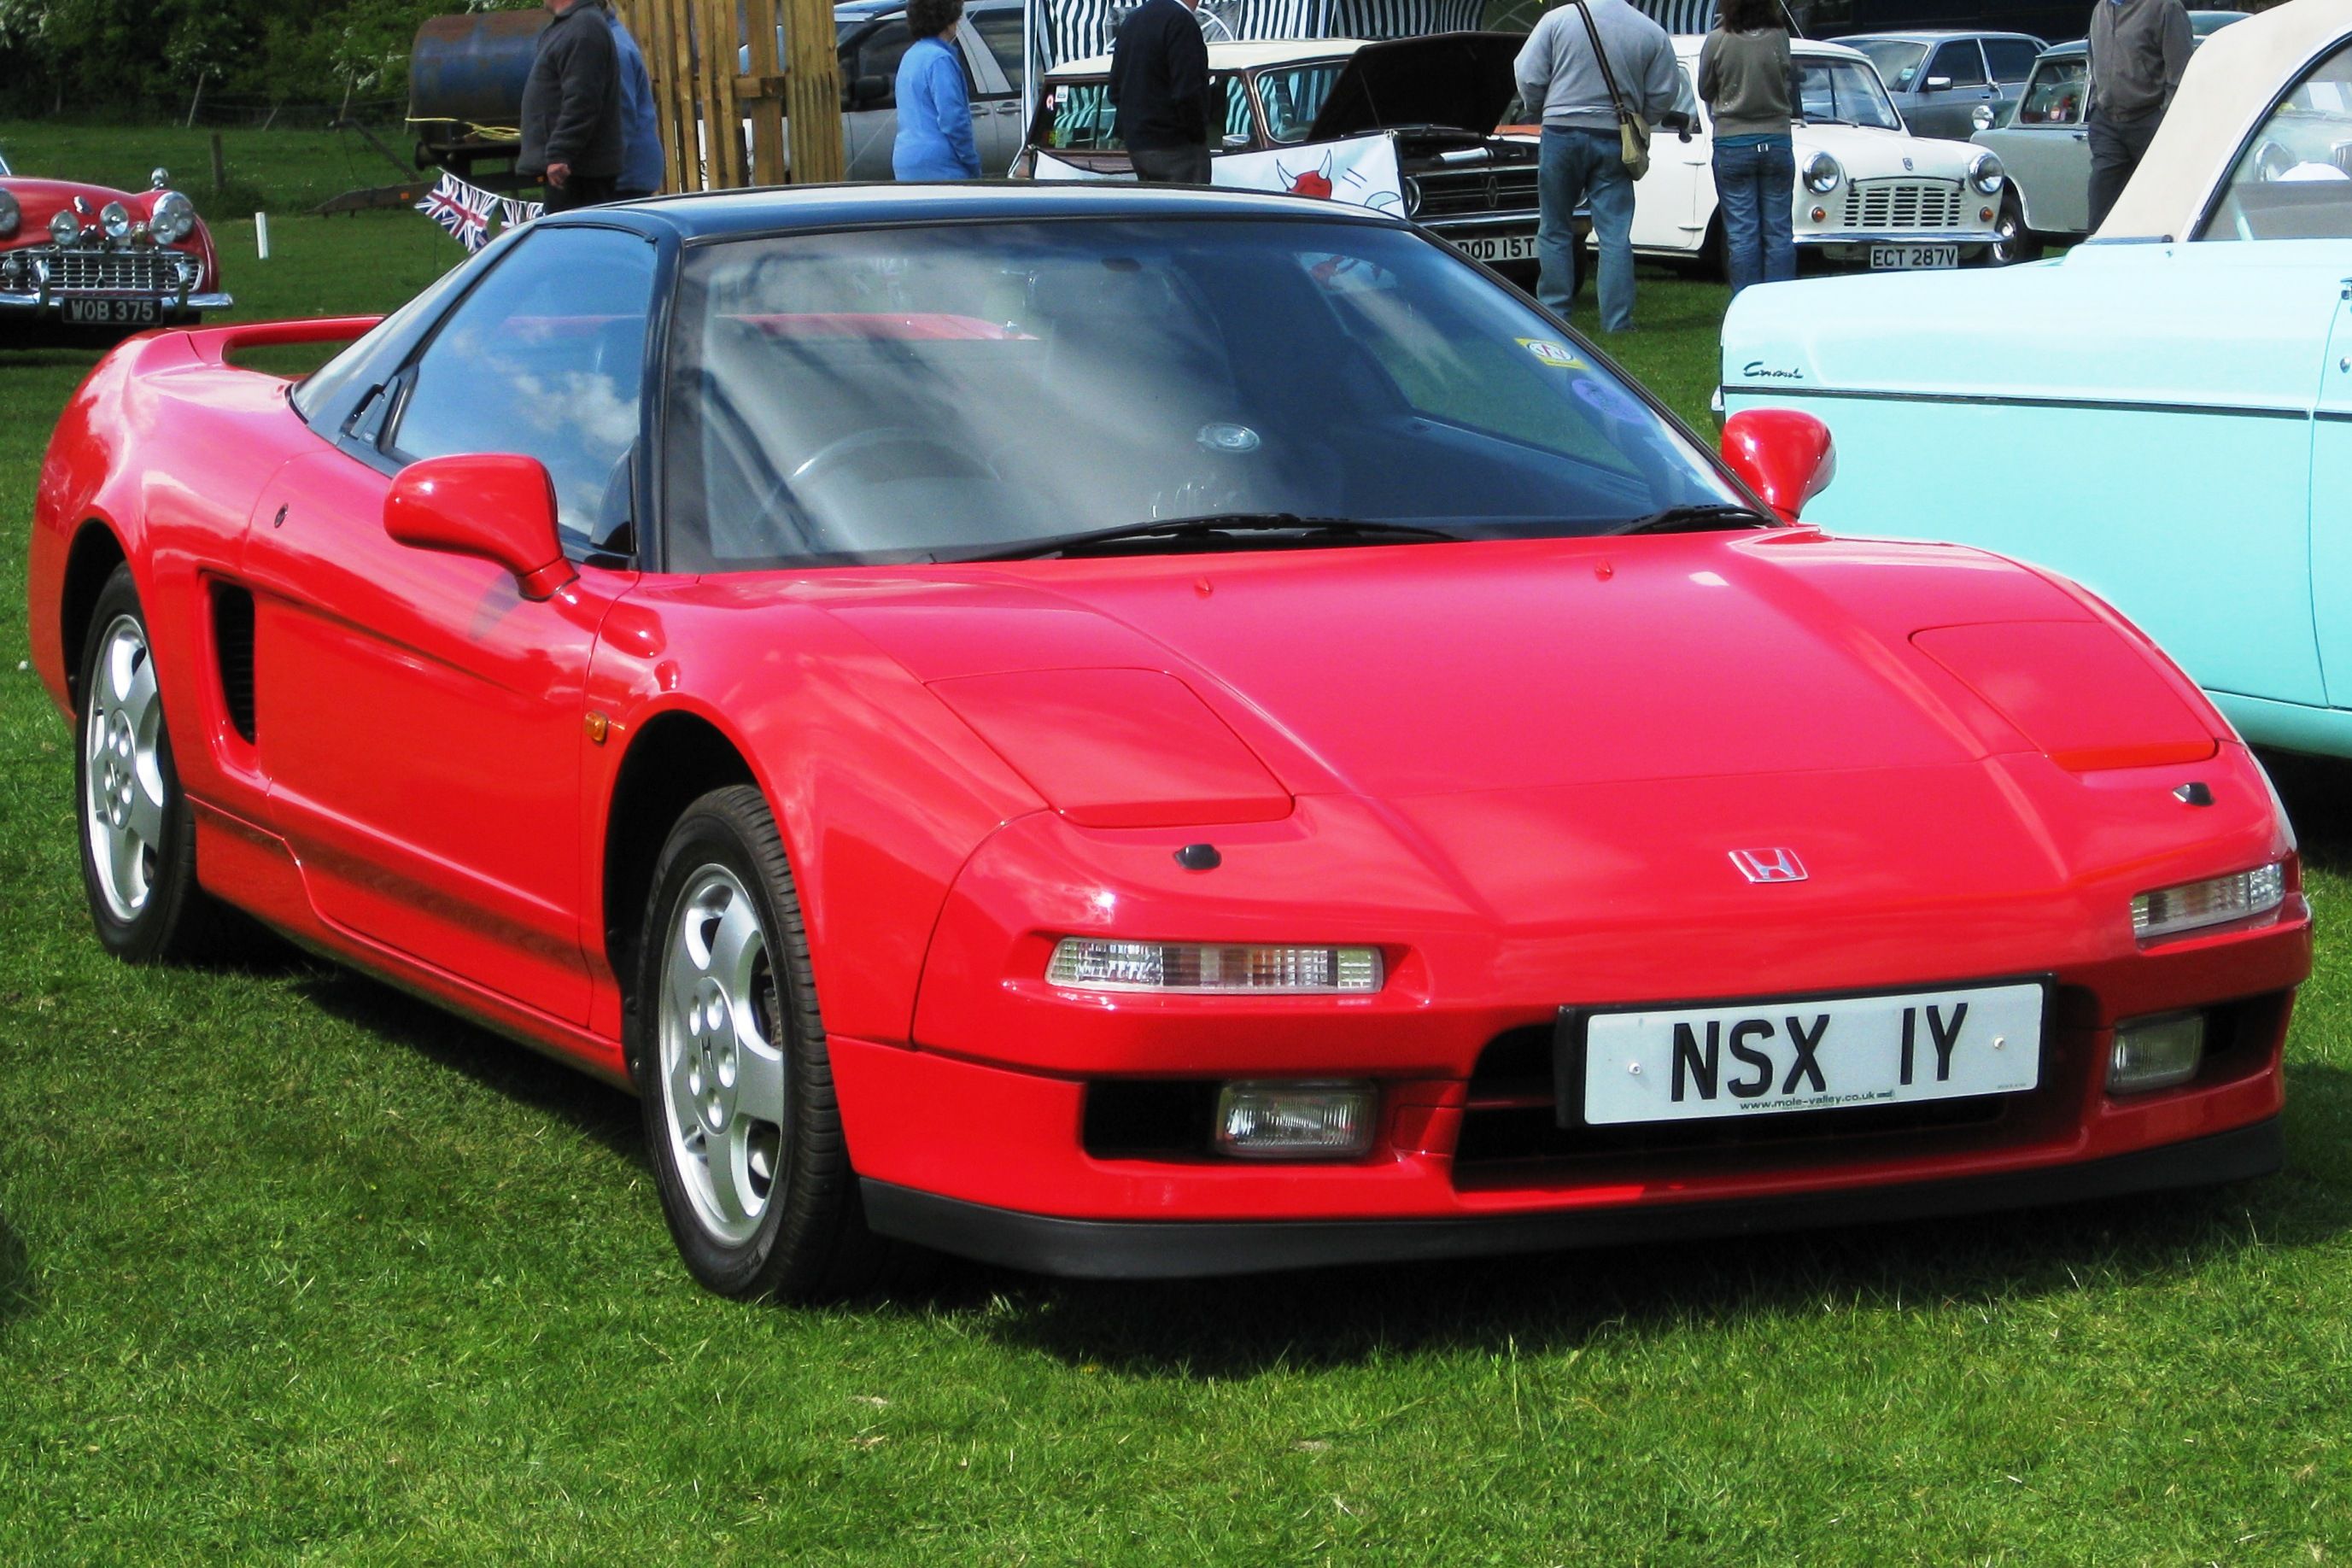 Honda NSX parked in a field